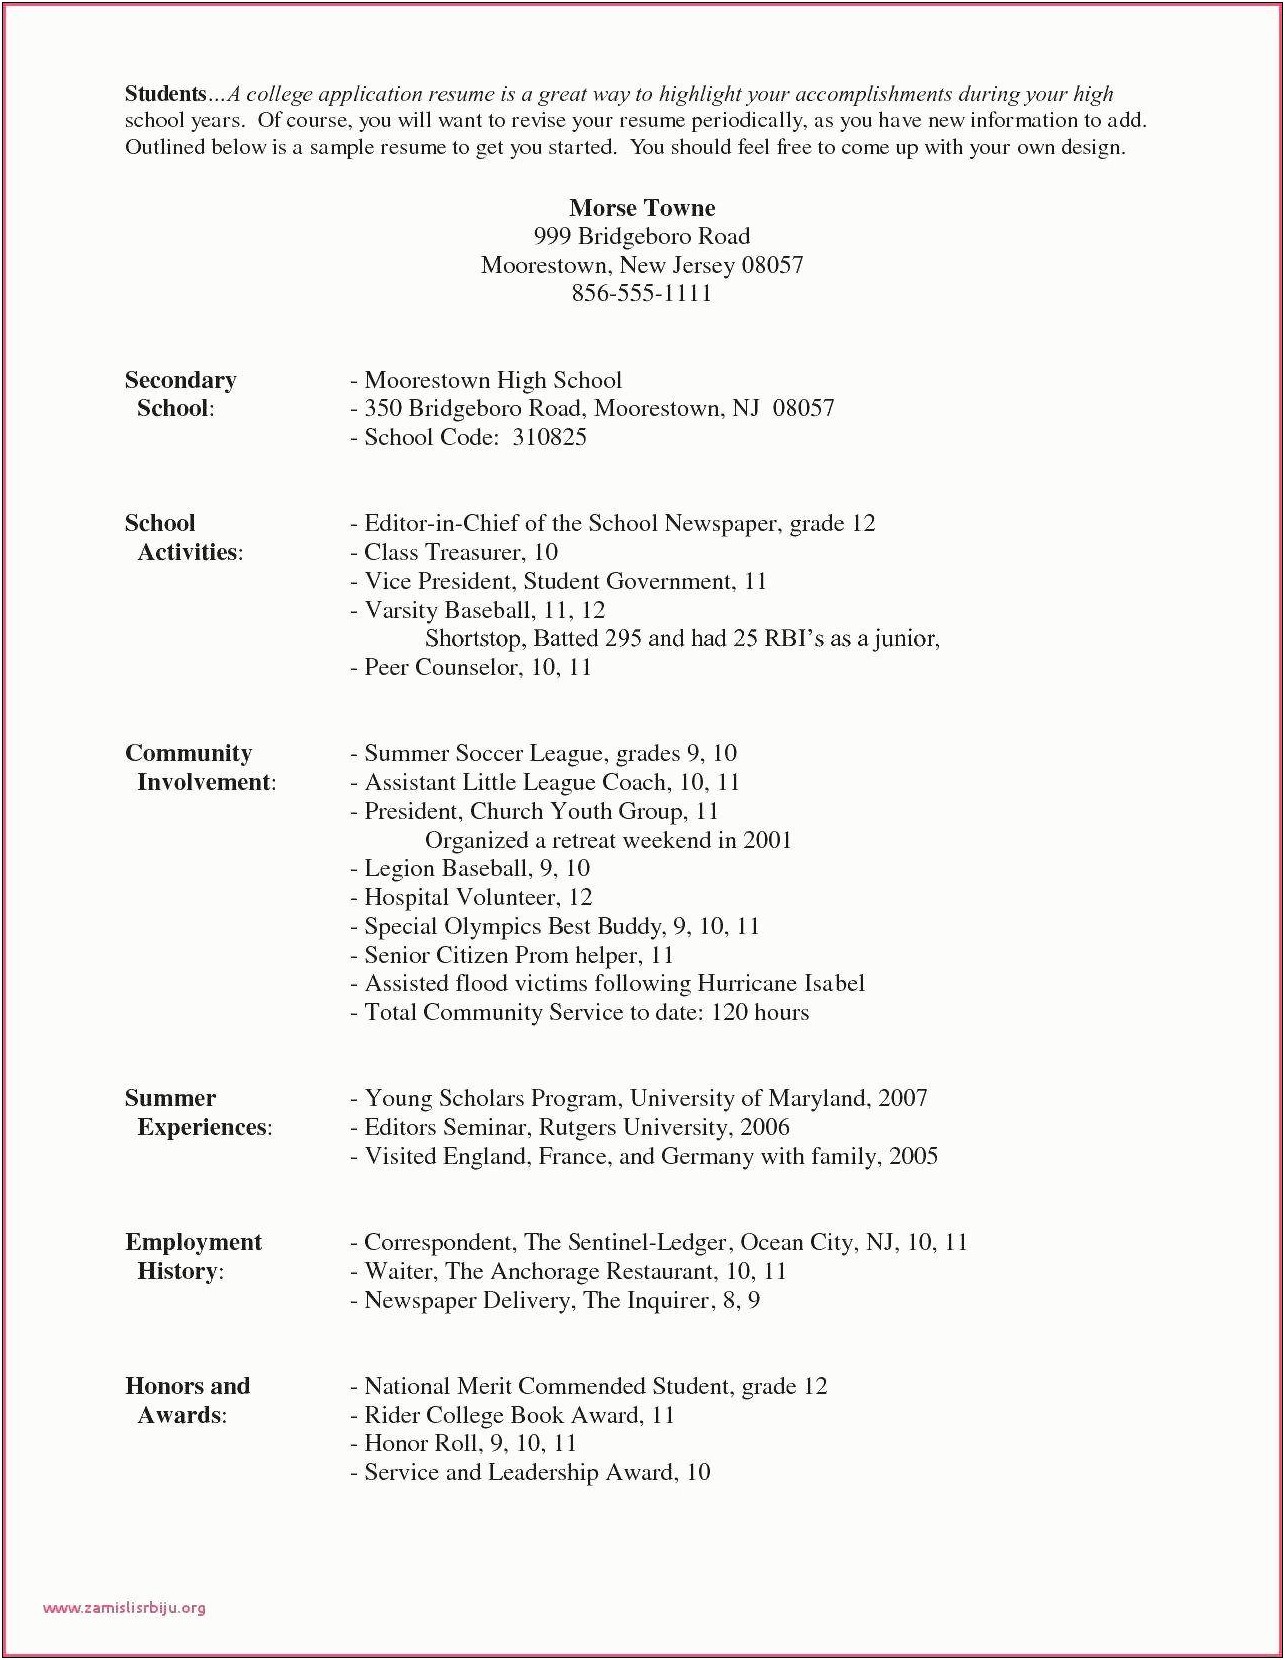 Resume Samples Awards And Honors